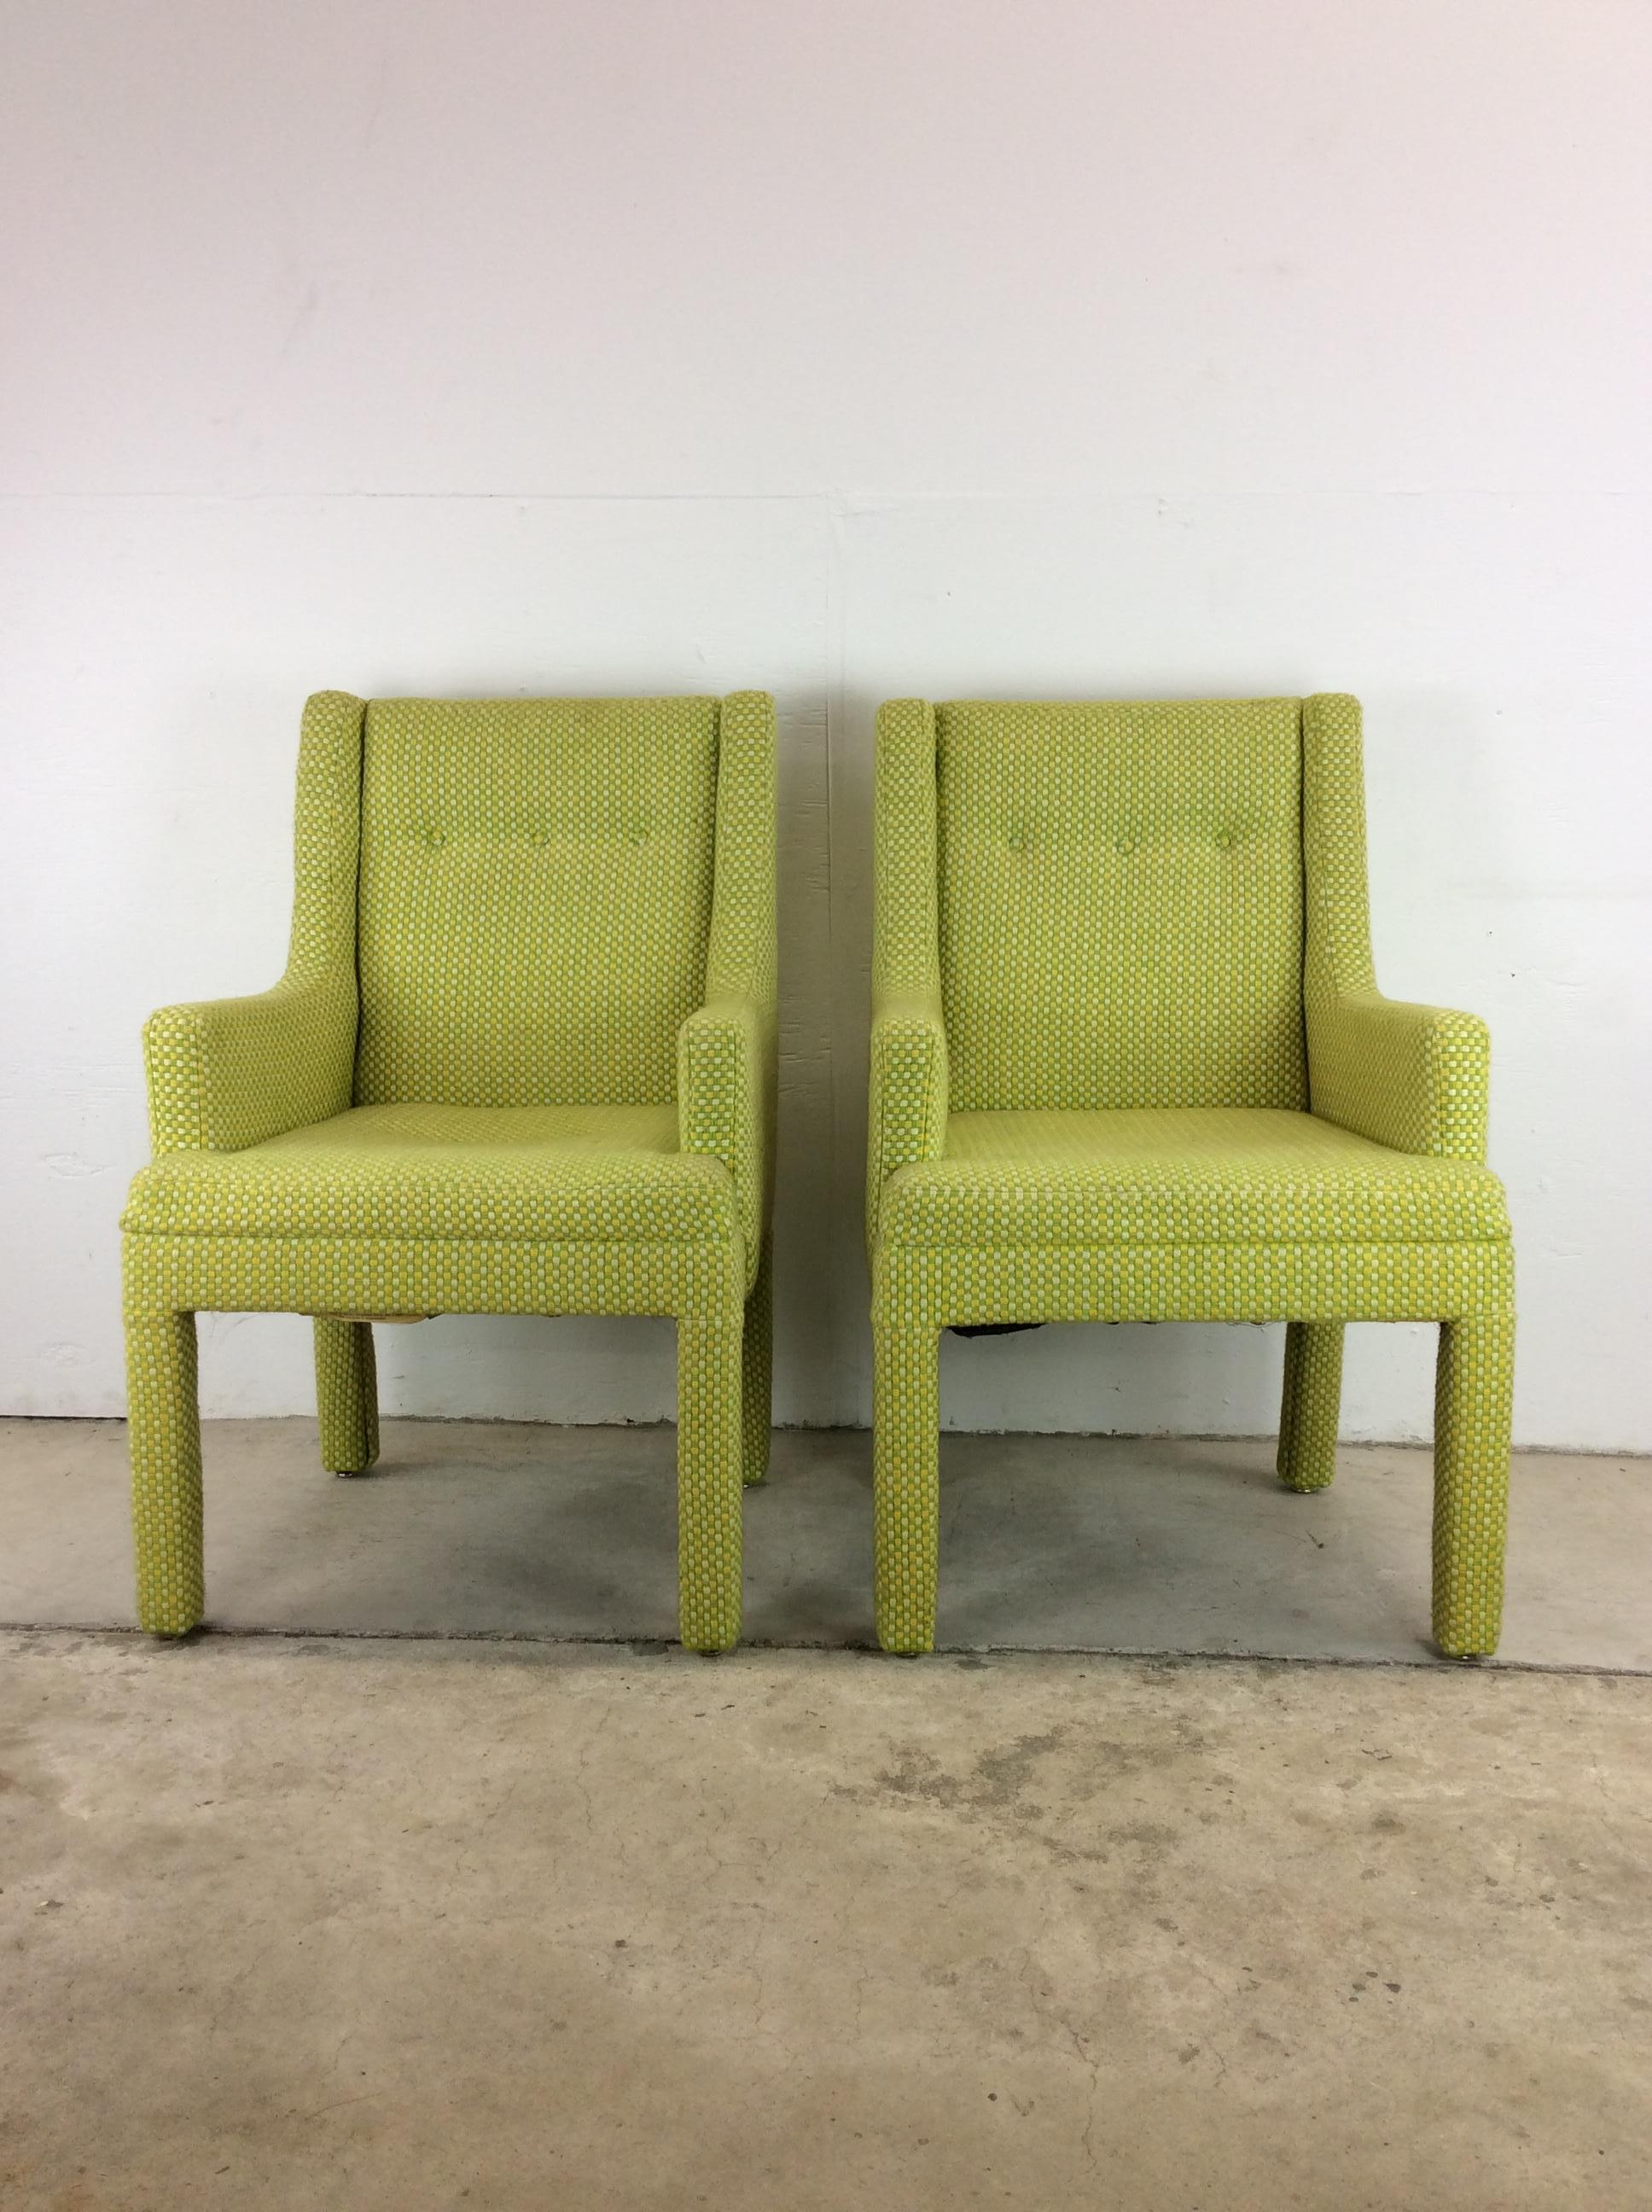 This pair of mid century modern arm chairs features vintage green, white & yellow checked upholstery, three button tufted seat back, wingback design, and tall upholstered legs. 

Check our other listings for similarly funky seating